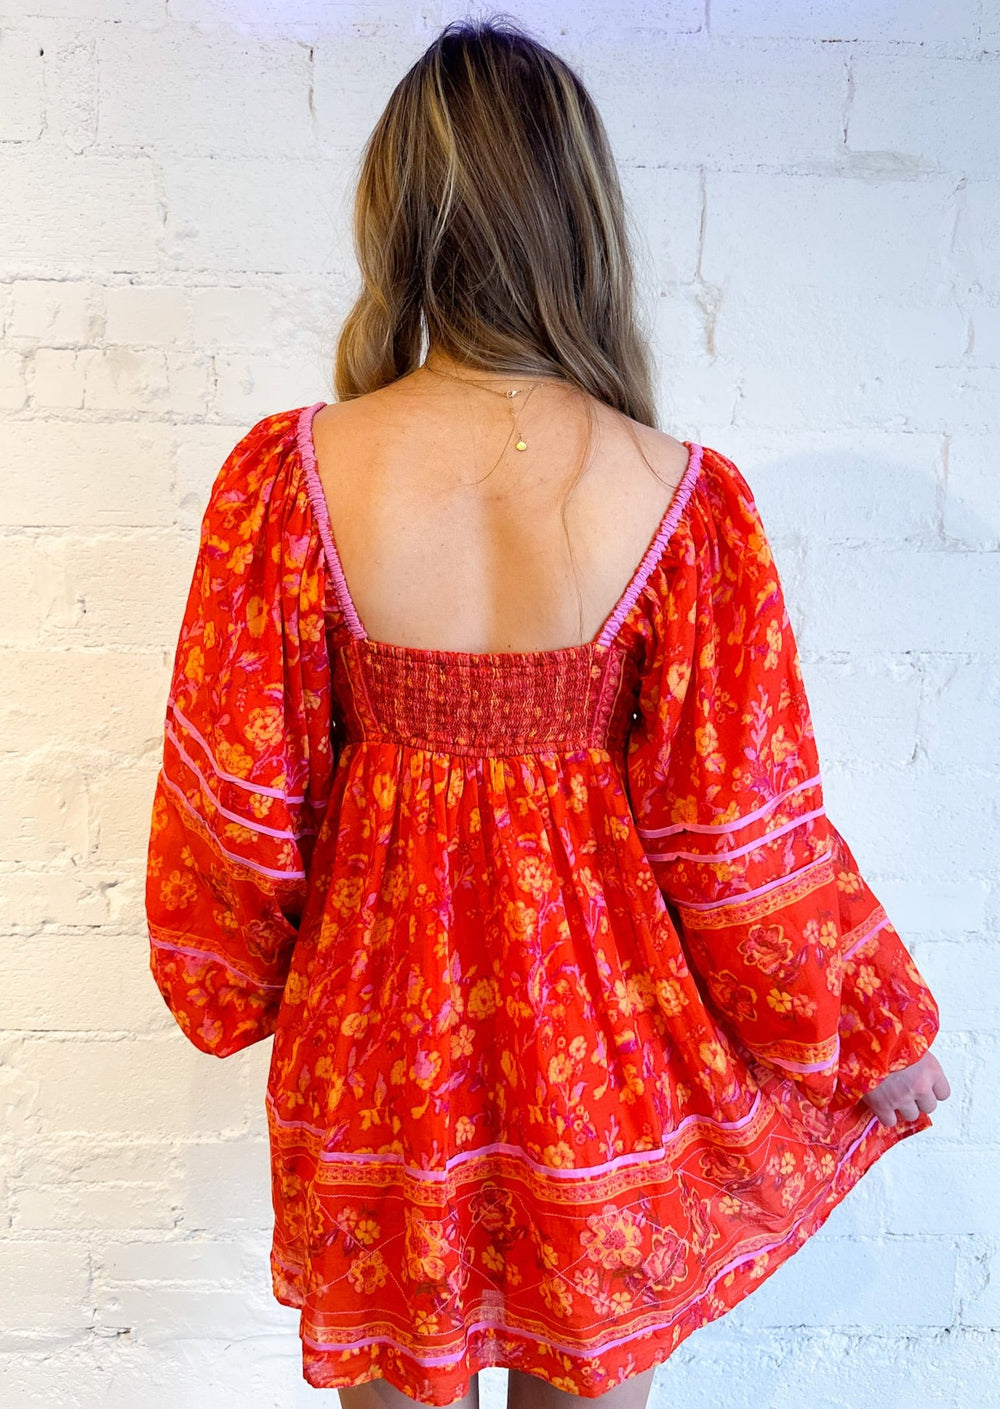 Free People Endless Afternoon Mini, Dresses, Free People, Adeline, dallas boutique, dallas texas, texas boutique, women's boutique dallas, adeline boutique, dallas boutique, trendy boutique, affordable boutique